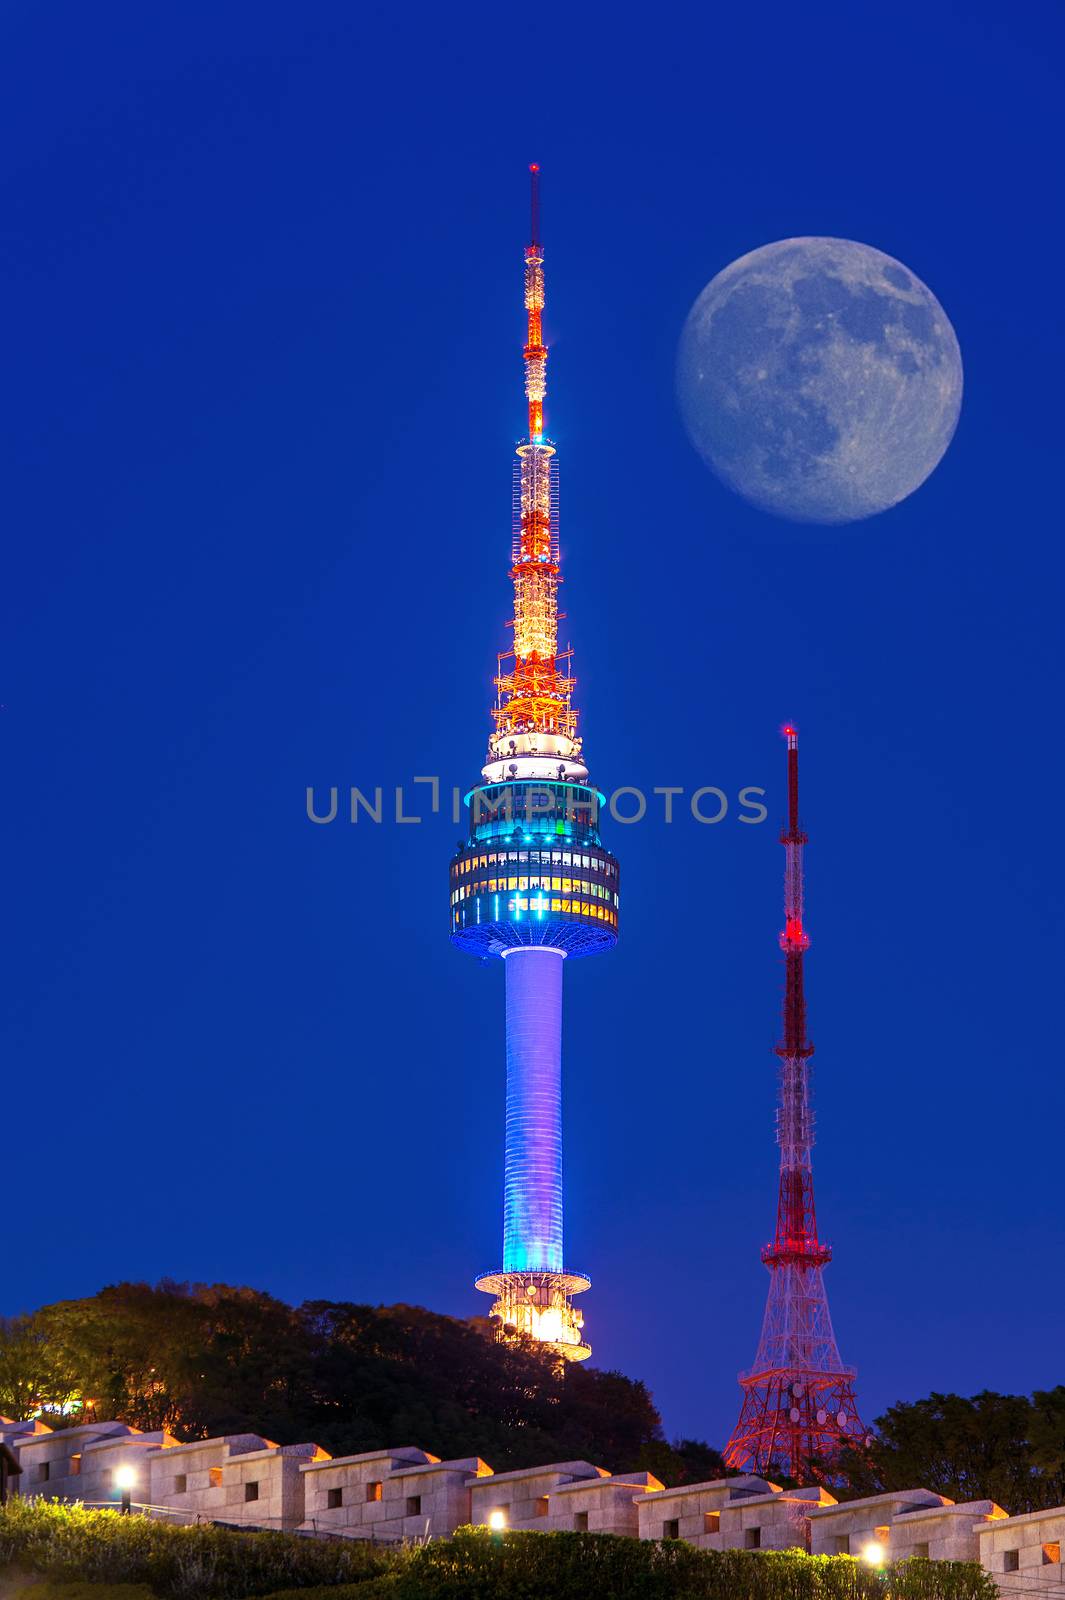 N Seoul Tower with full moon Located on Namsan Mountain in central Seoul,South Korea.